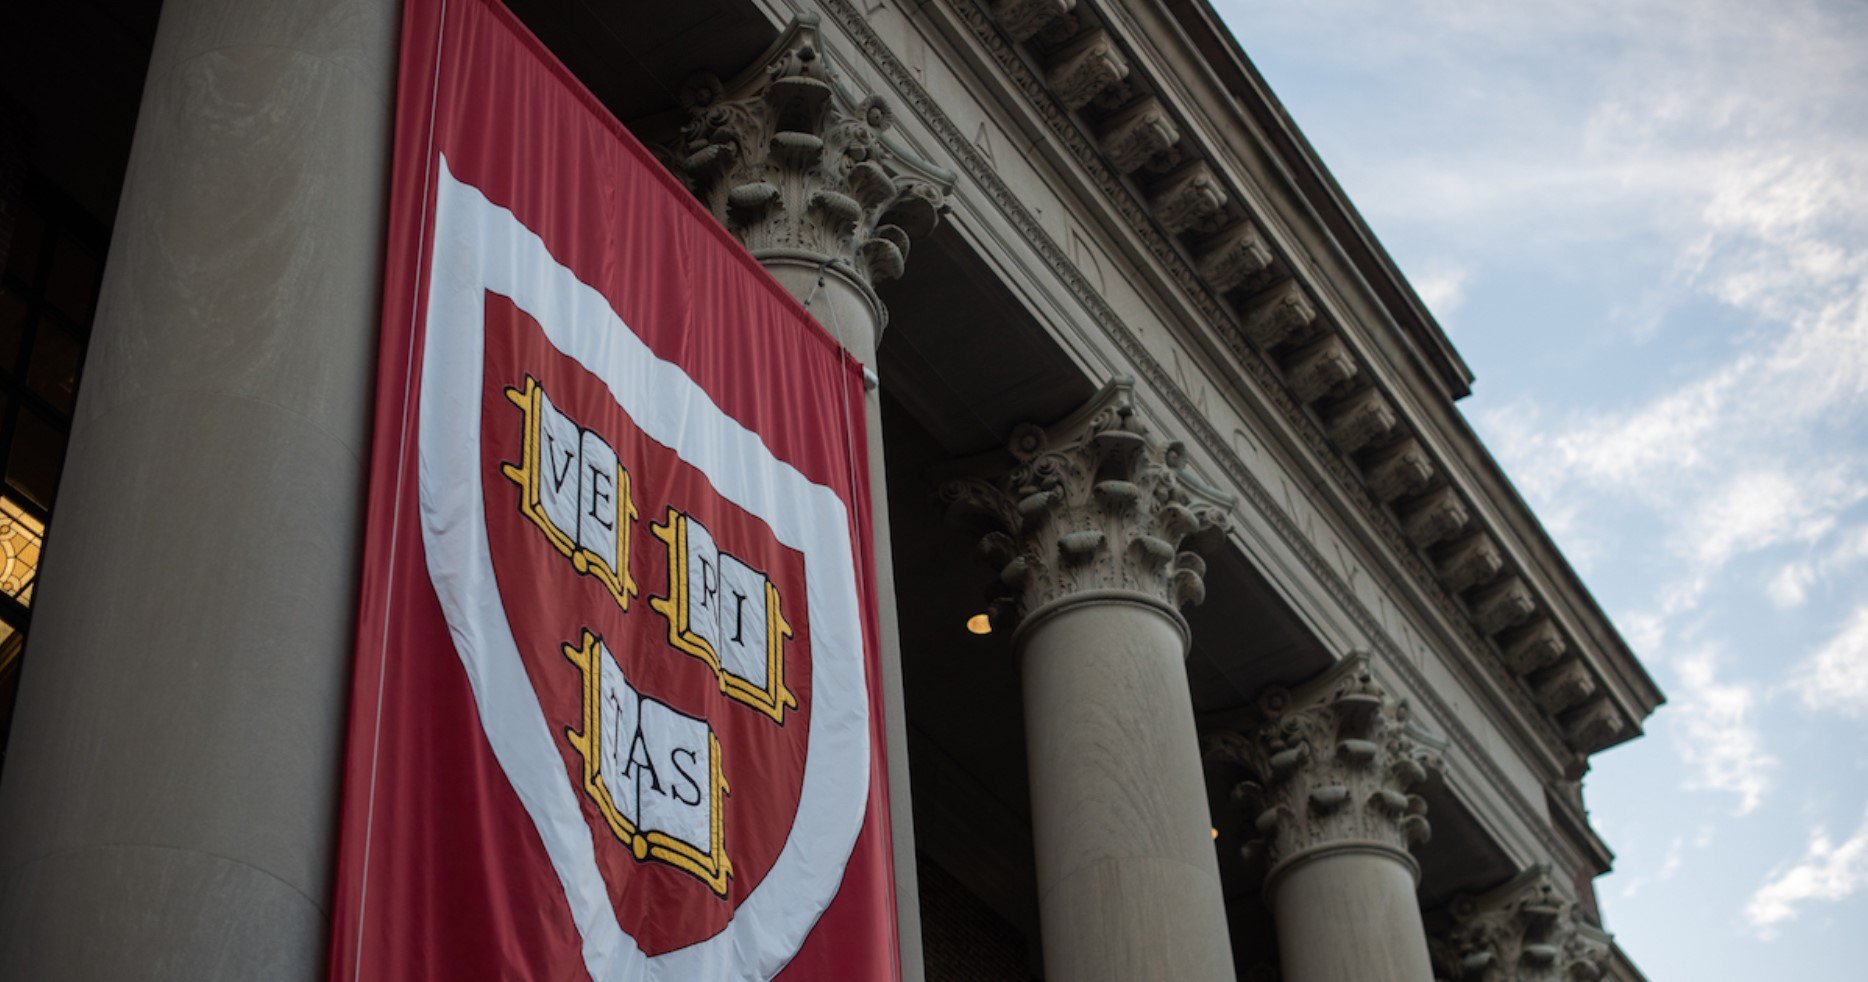 <p>Even though Harvard has had its fair share of issues and is certainly seeing fewer applicants than it has in years, Harvard remains one of the most impressive, exclusive, and idolized universities in the world.  </p> <p>Hundreds of the country’s leaders, doctors, lawyers, and influential members of the general public attended Harvard University, and the current students are highly likely to go on and change the world in a wide variety of ways.    </p>